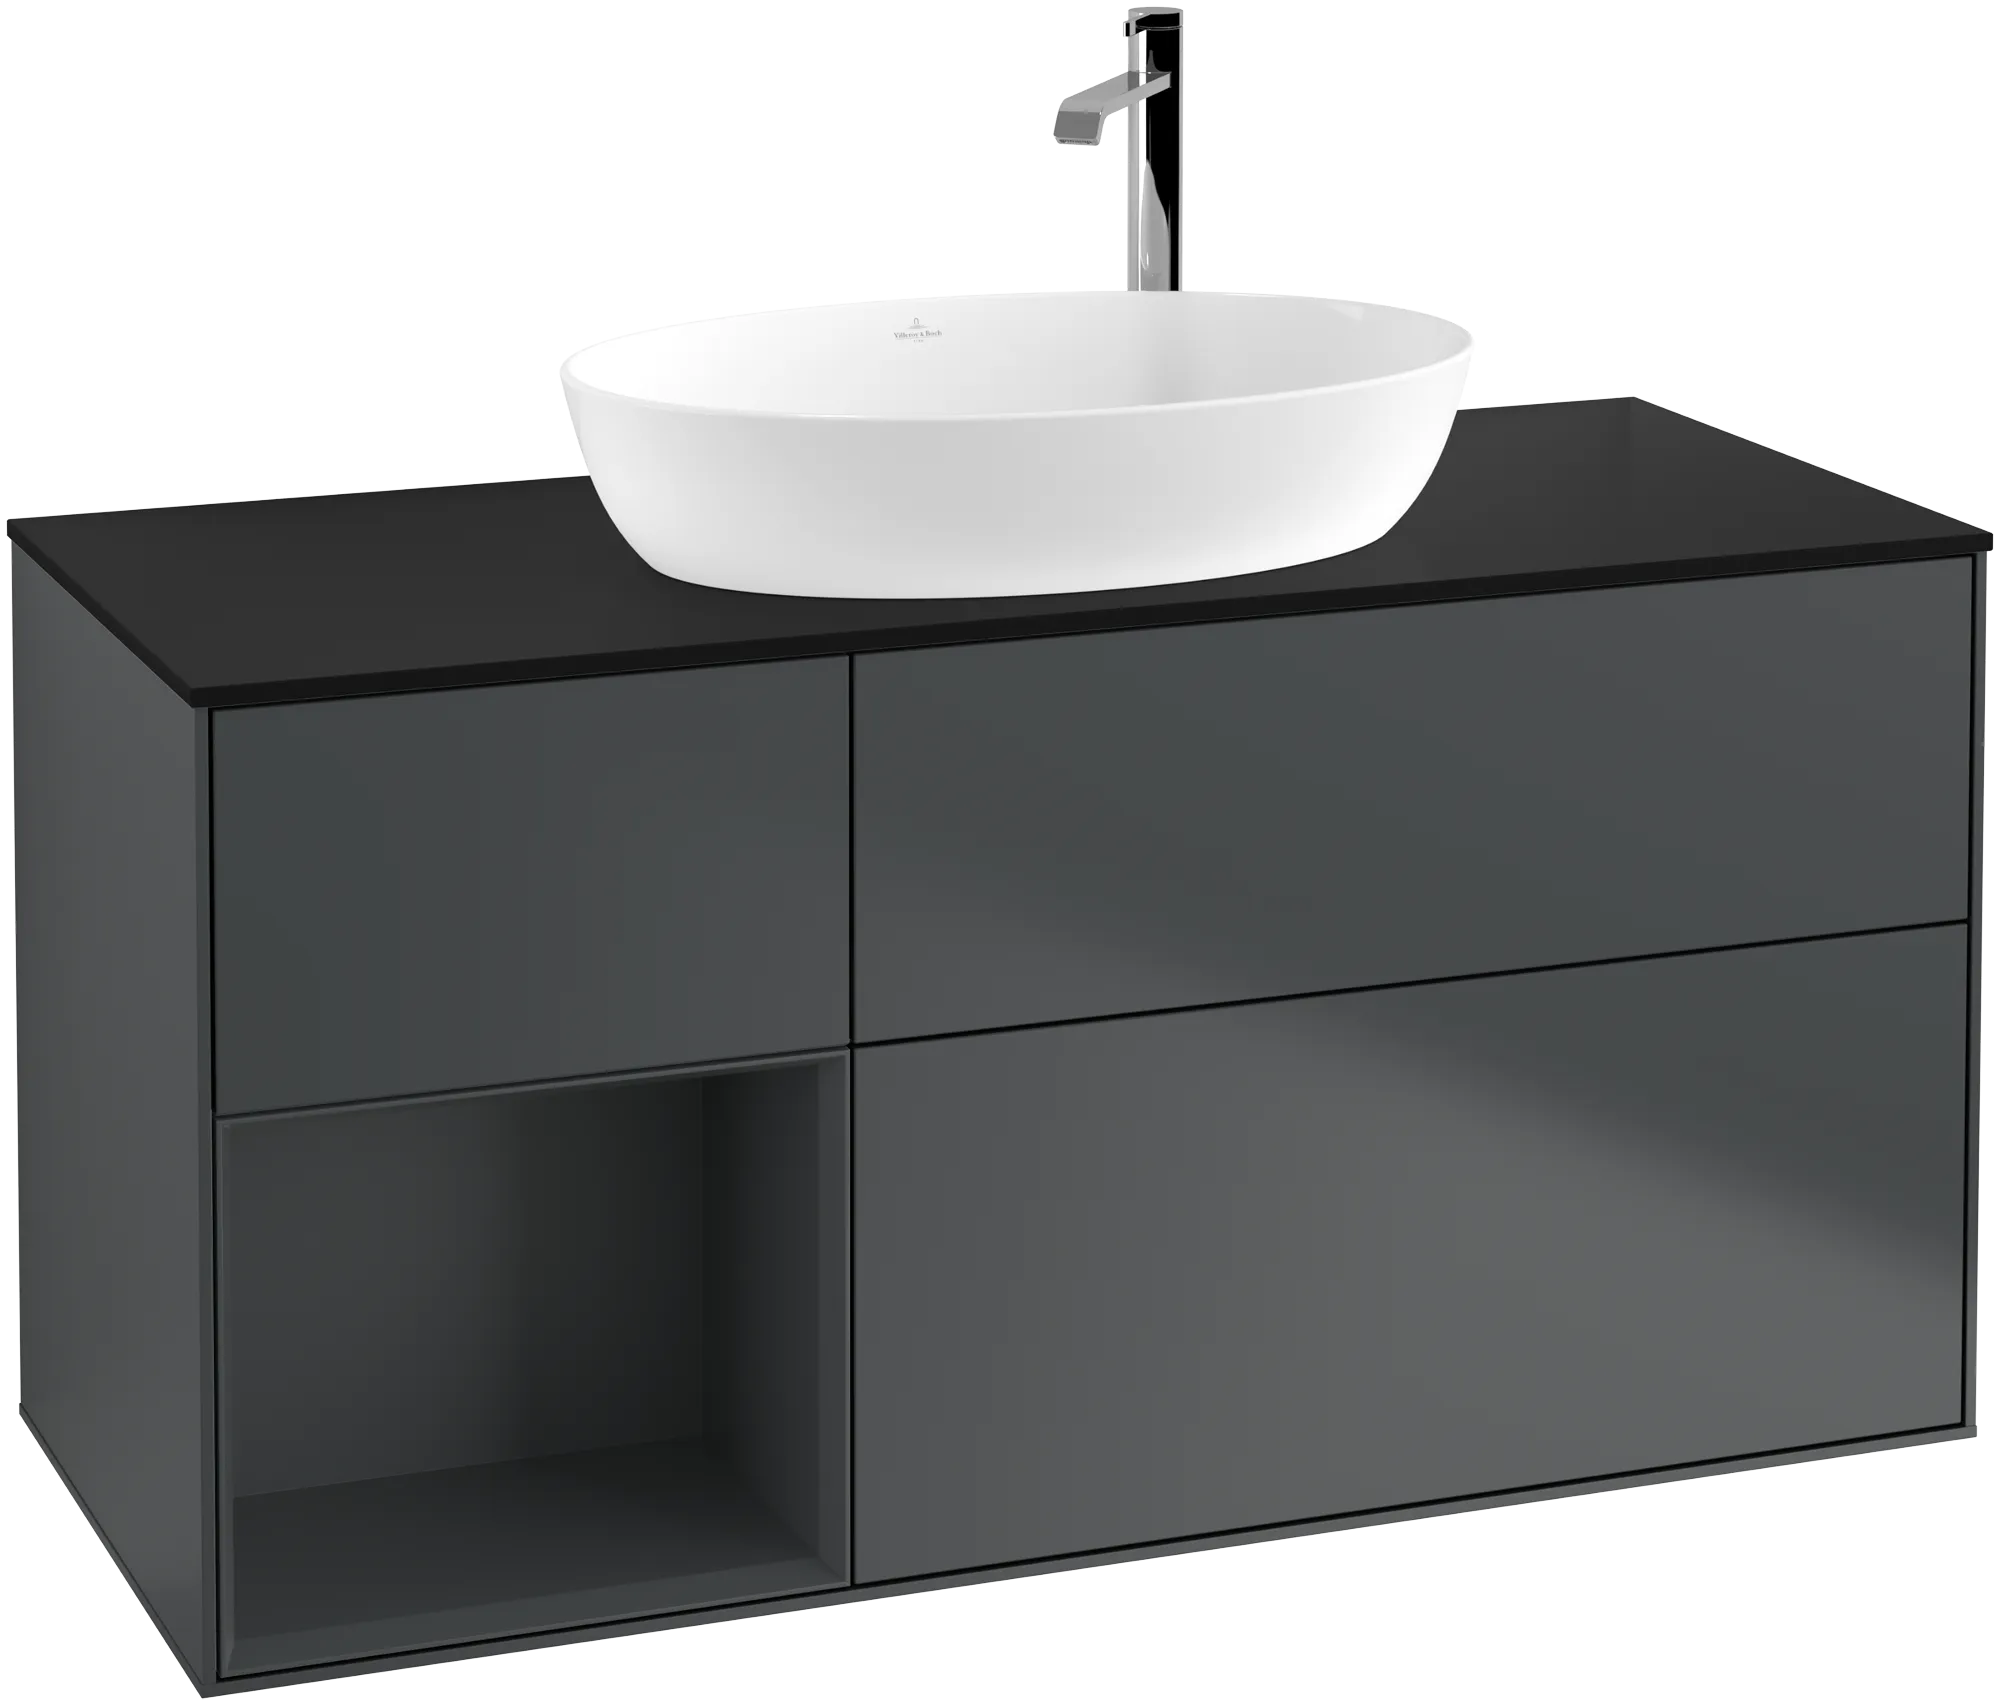 VILLEROY BOCH Finion Vanity unit, with lighting, 3 pull-out compartments, 1200 x 603 x 501 mm, Midnight Blue Matt Lacquer / Midnight Blue Matt Lacquer / Glass Black Matt #G942HGHG resmi